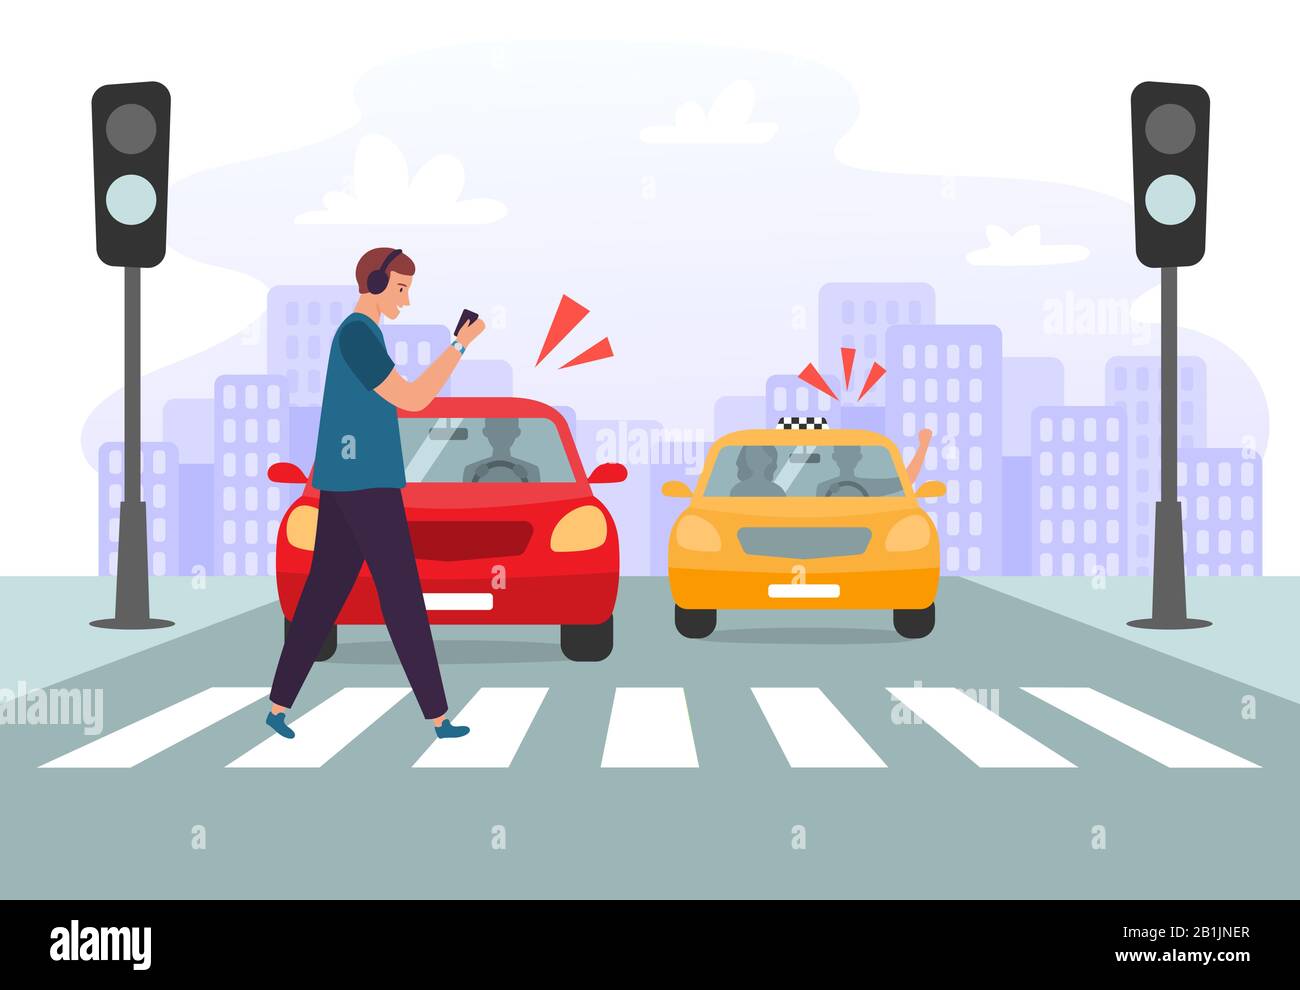 Road safety issue Stock Vector Images - Alamy